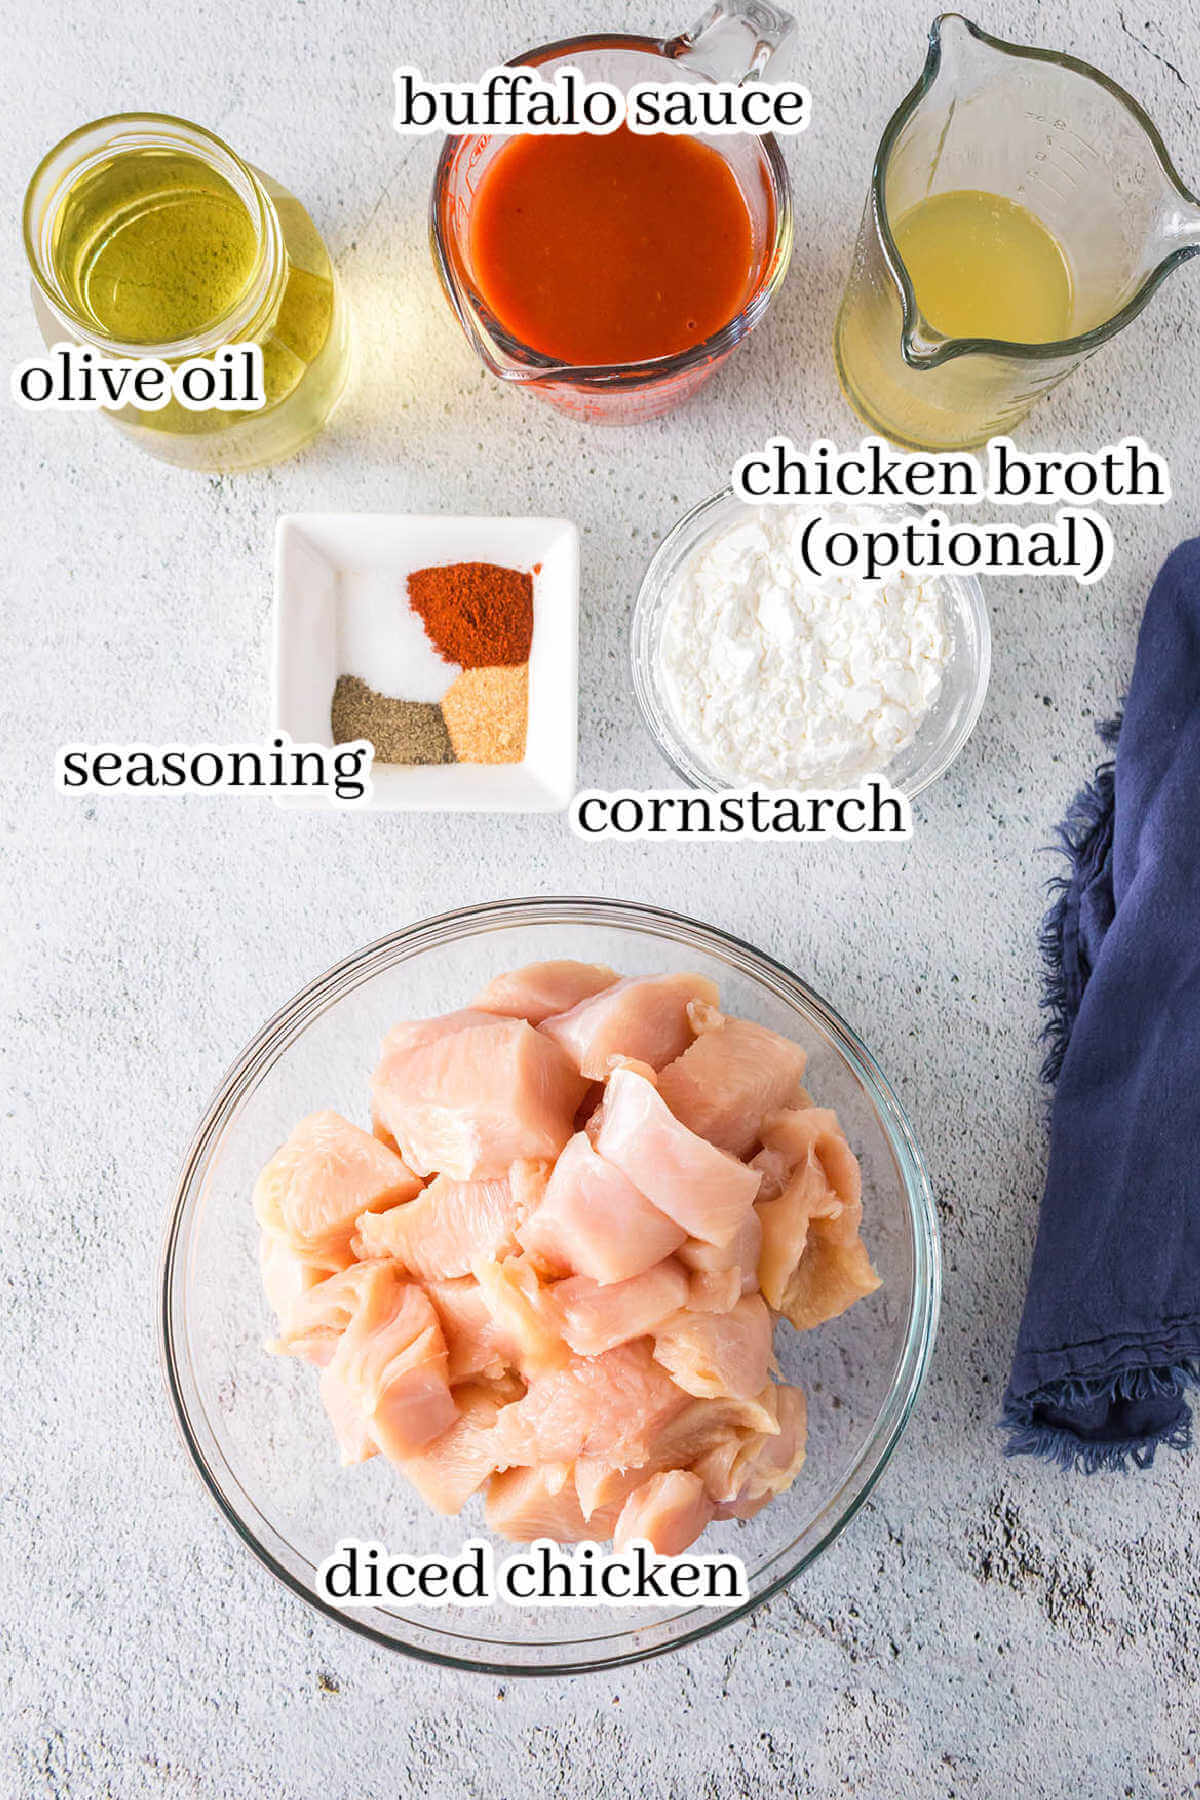 Ingredients to make recipe, with print overlay.